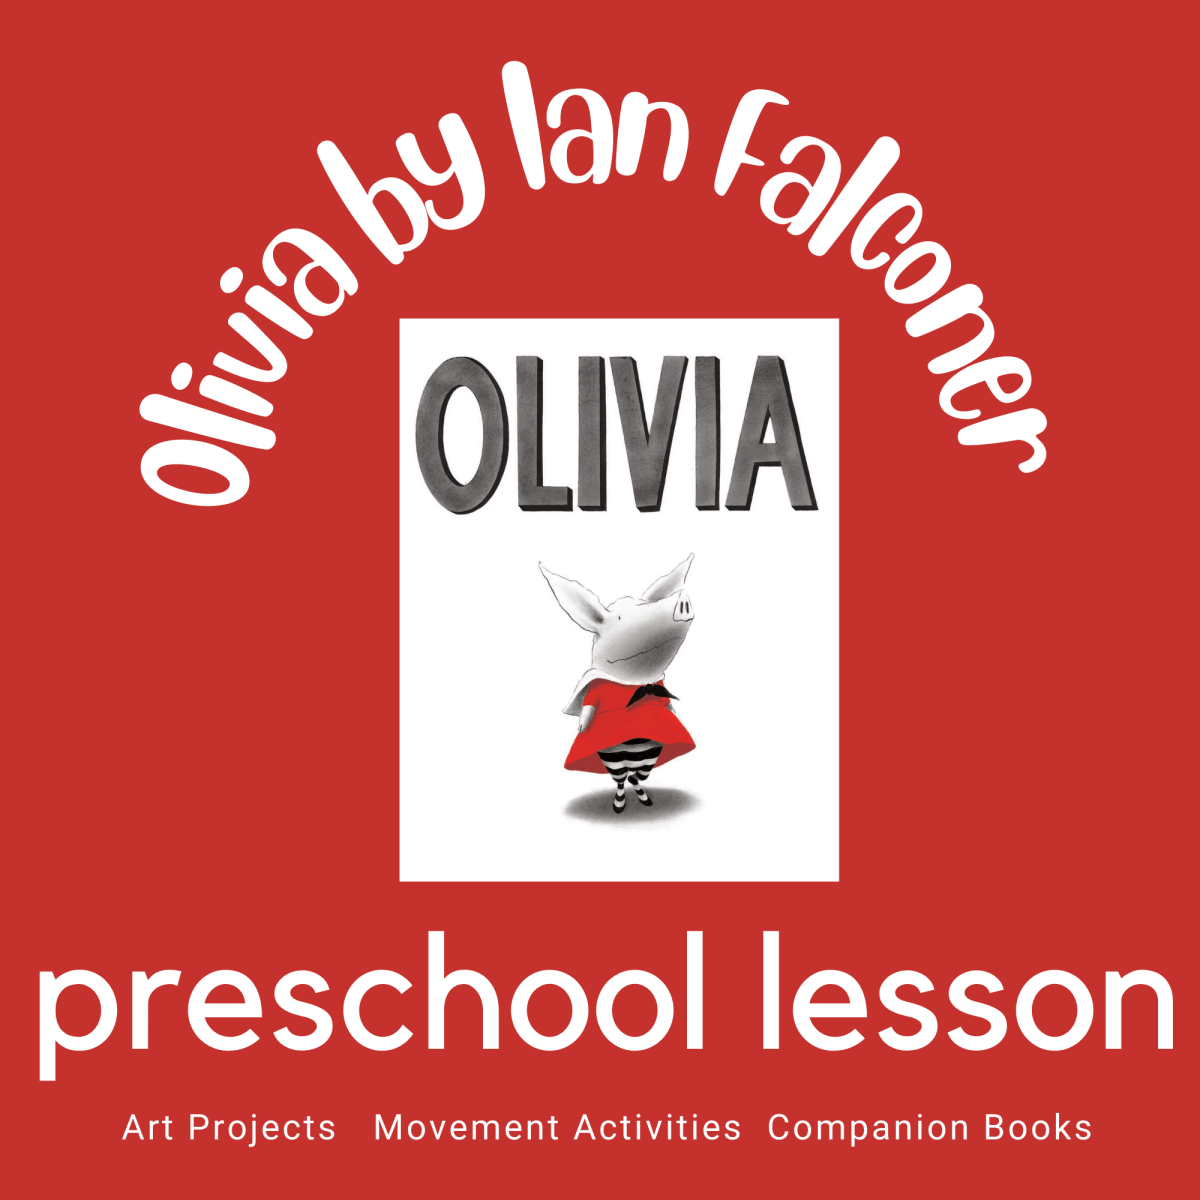 Olivia by Ian Falconer Preschool Lesson. This lesson includes reading tips, companion books, music and movement activities, and art explorations.